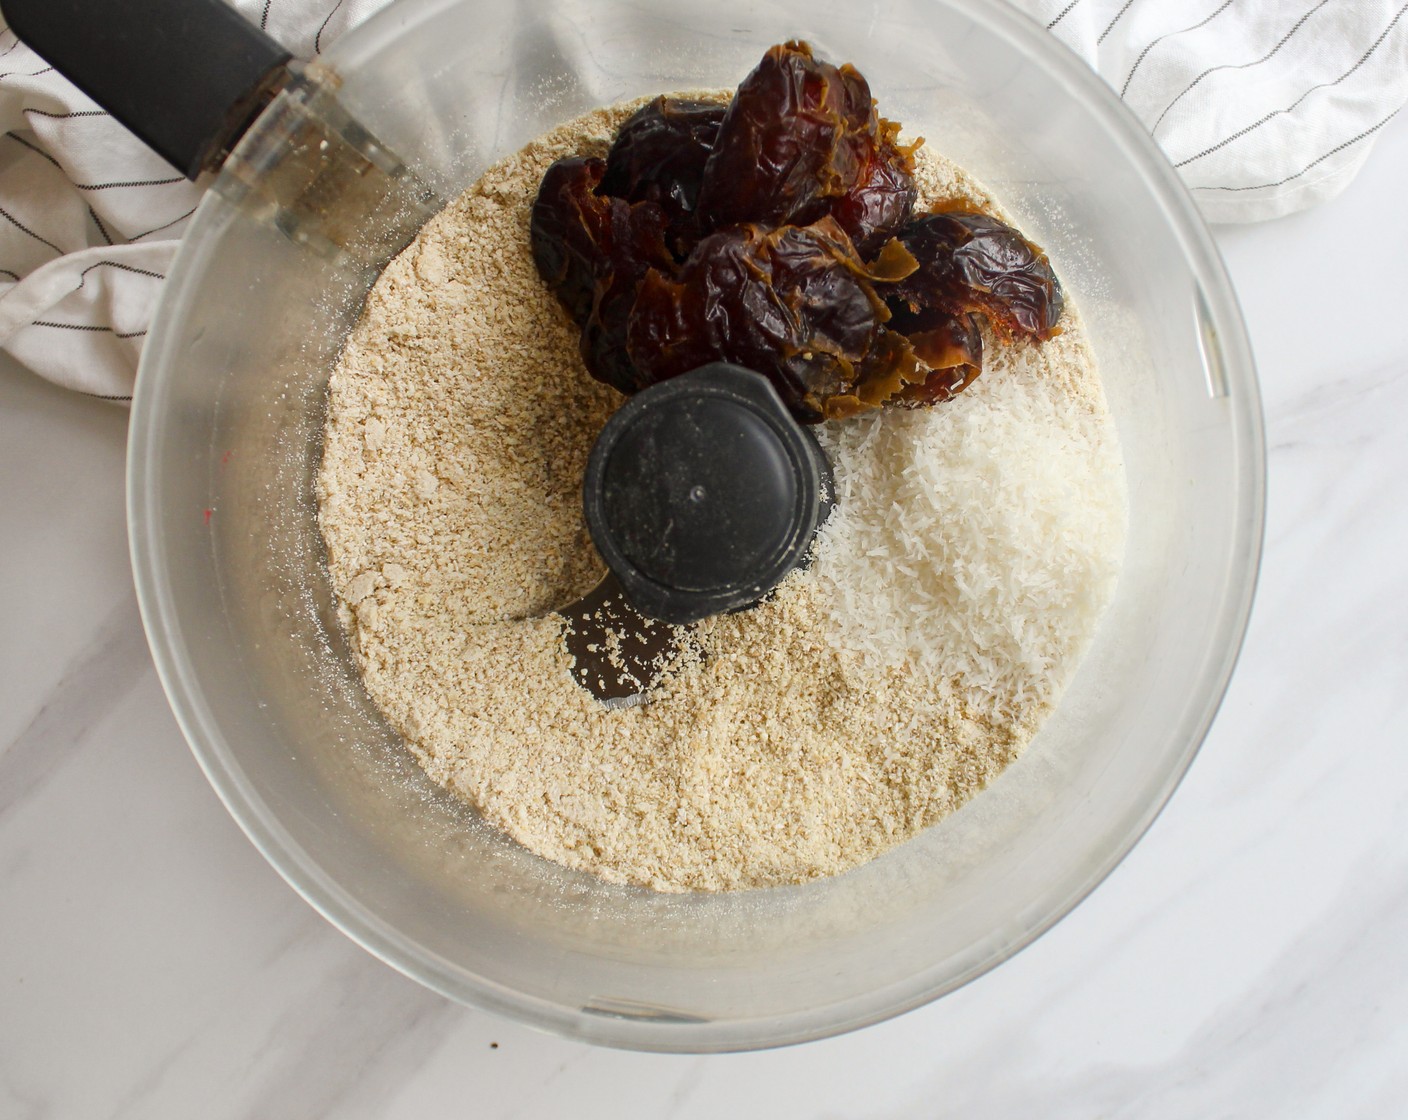 step 3 Place in the Unsweetened Shredded Coconut (1/4 cup), Vanilla Extract (1 tsp), including the dates together with 2 tablespoons of Water (2 Tbsp) and blend until smooth. You might need to add more water to achieve a sticky dough consistency, a tablespoon at a time.